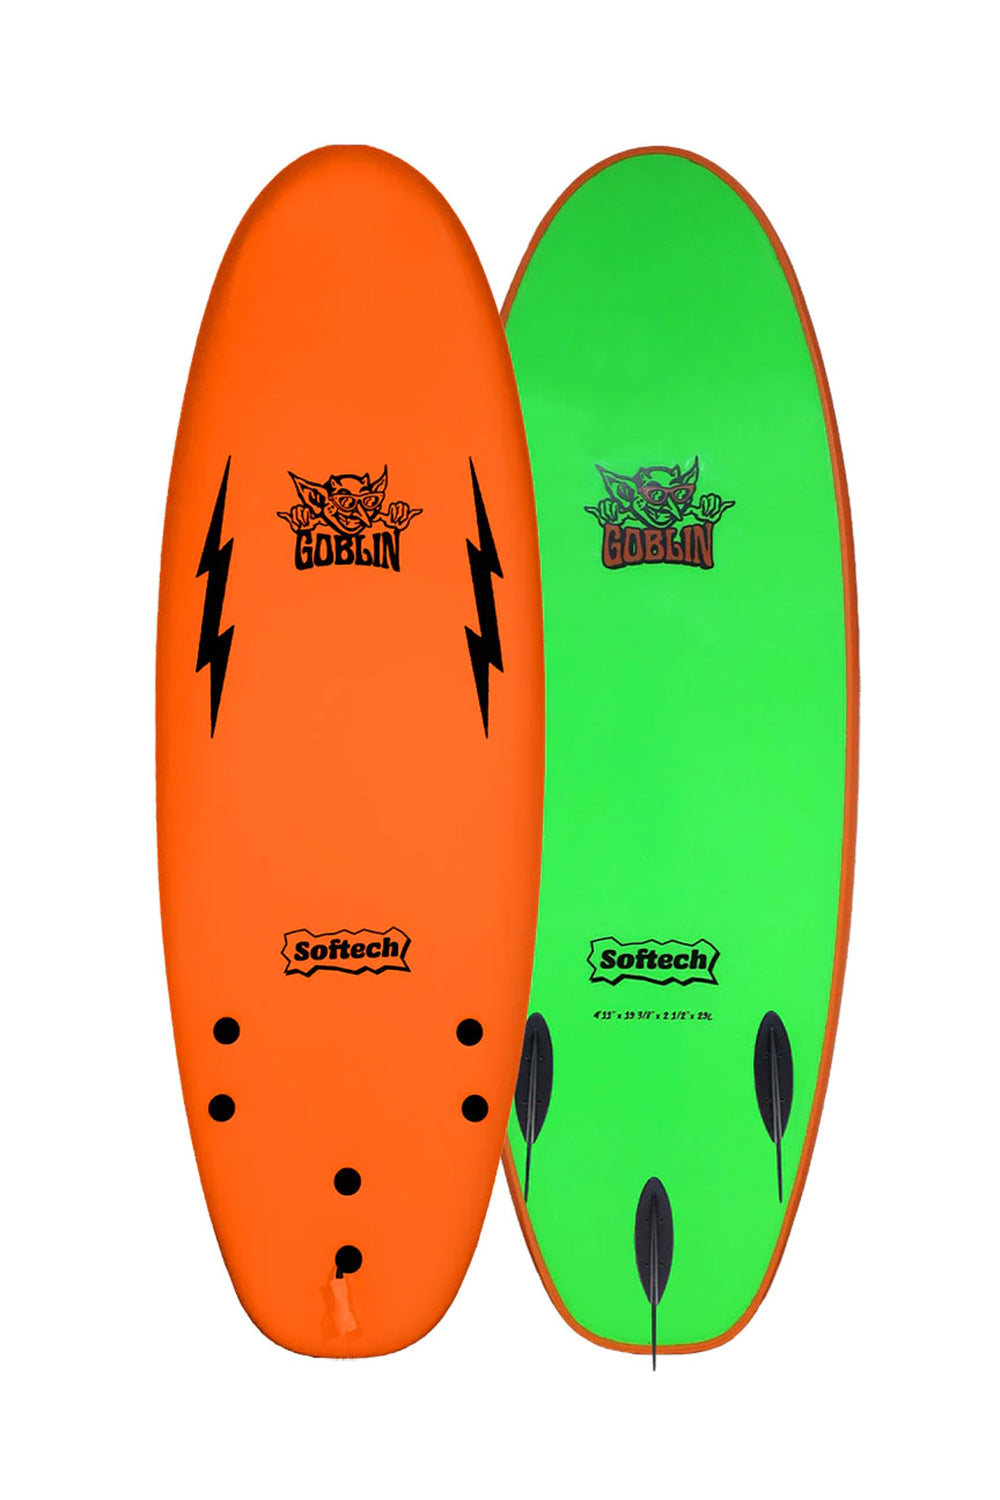 Softech Goblin Softboard - Comes With Fins